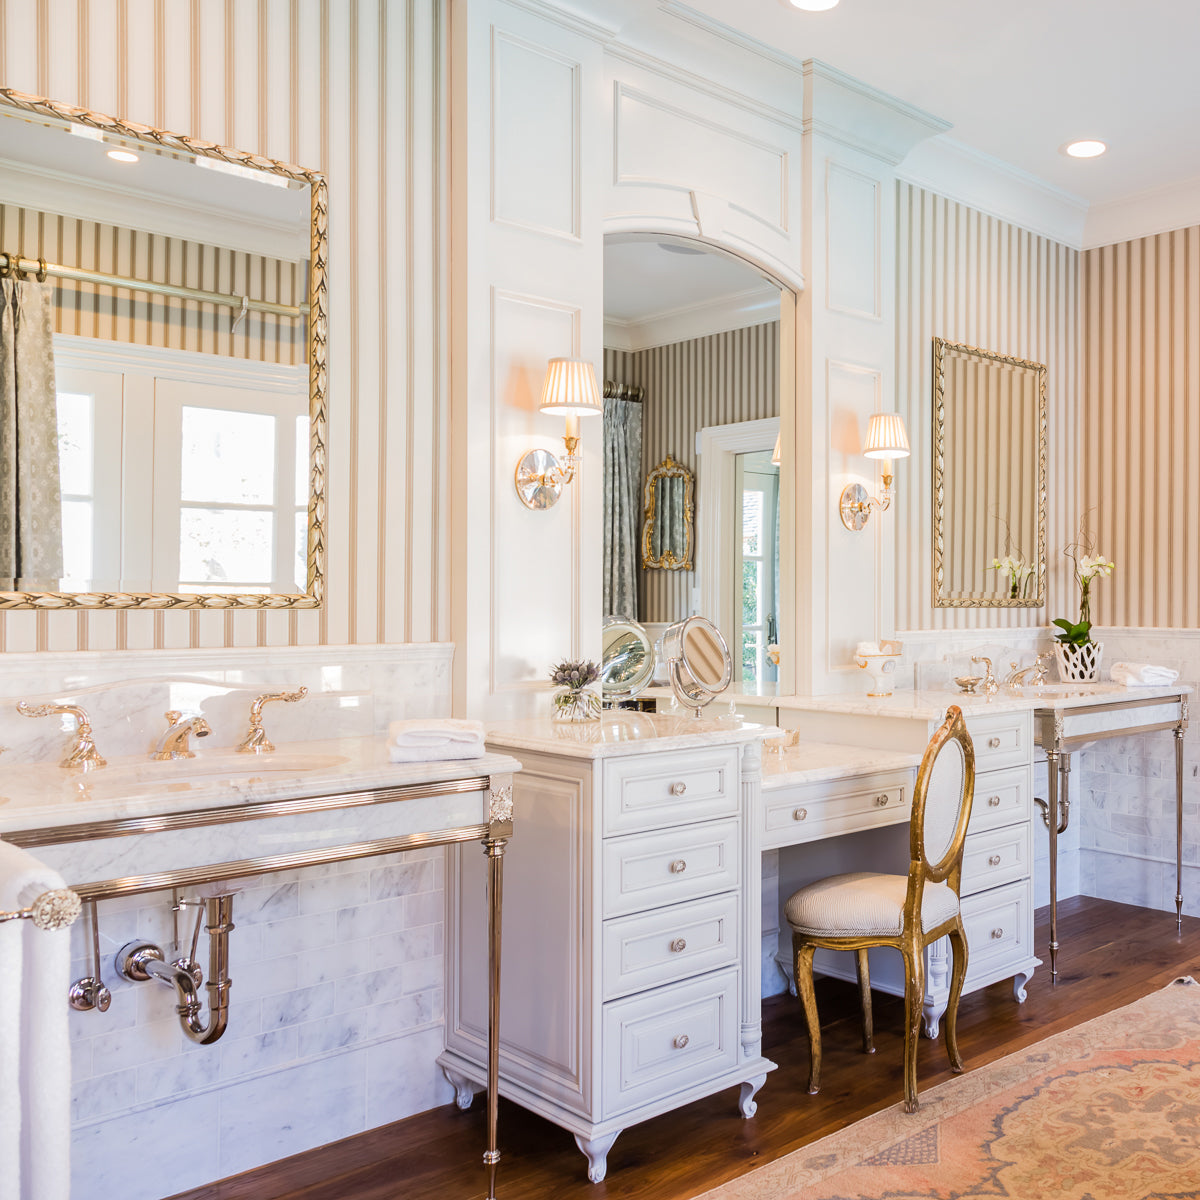 Crystal sconces with antique brass accents in bathroom with mirrors and chair.